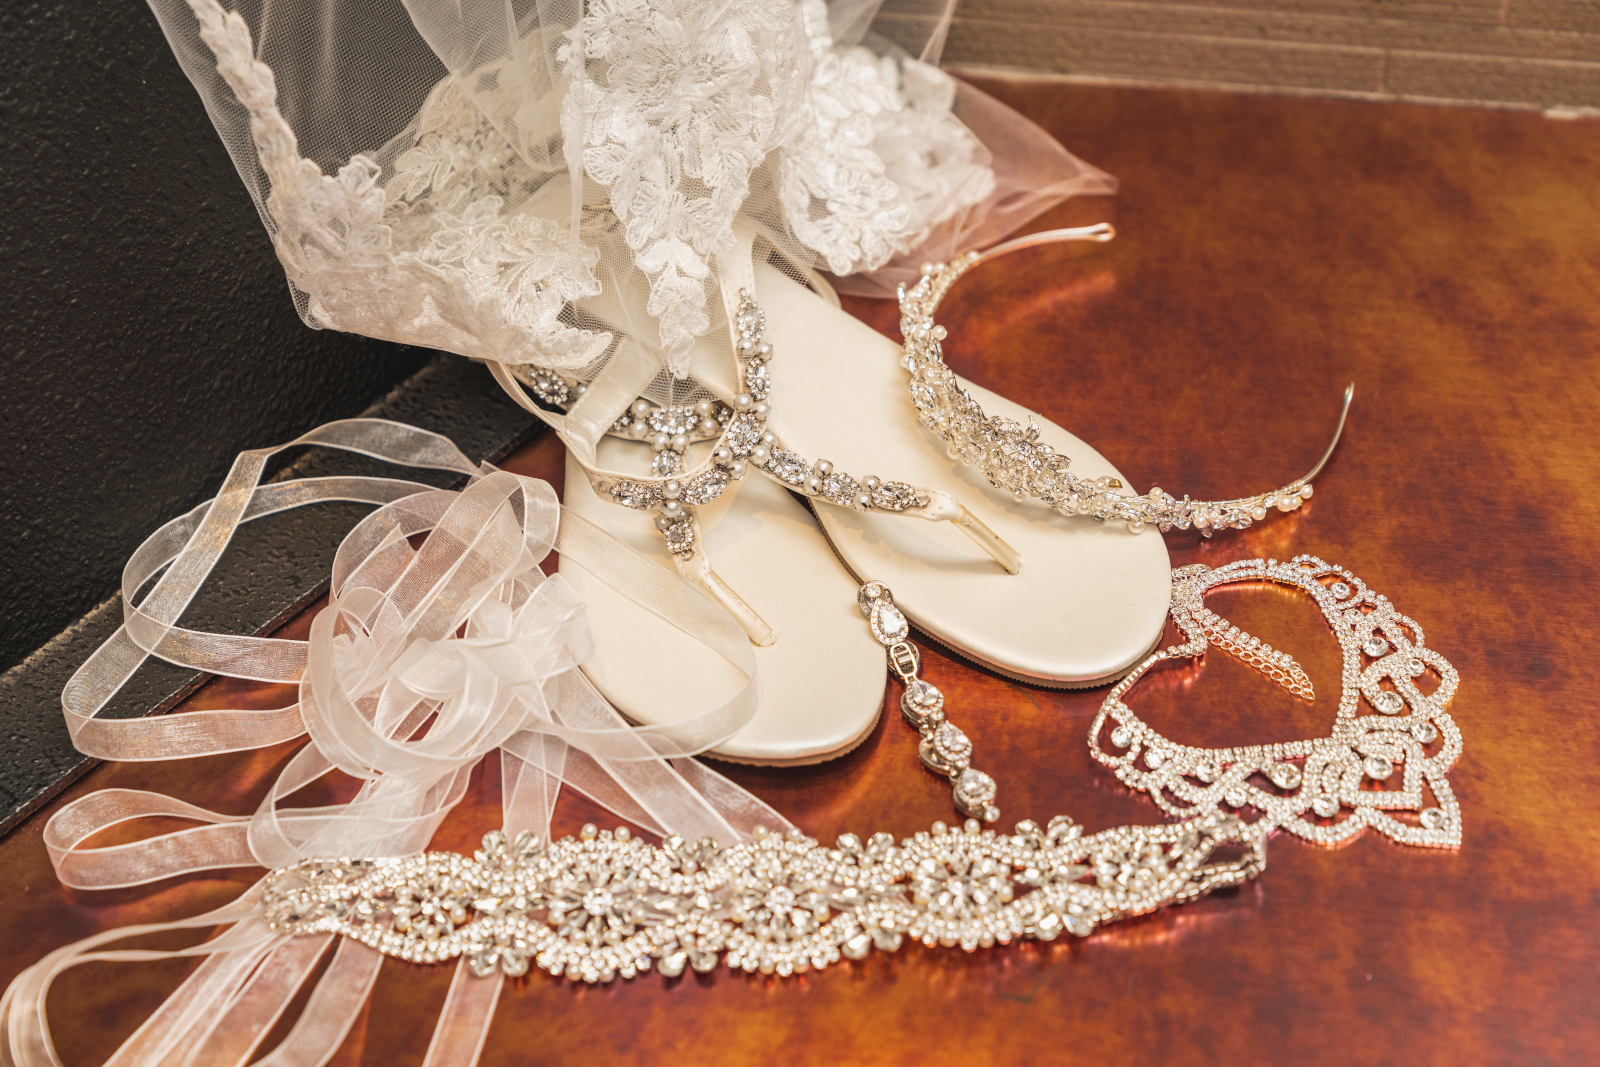 Wedding attire, wedding accessories, wedding shoes, wedding jewelry, tiara, necklace, bracelet, lace, silver and white, gorgeous, African American wedding, romantic wedding ceremony at Hilton Akron/Fairlawn